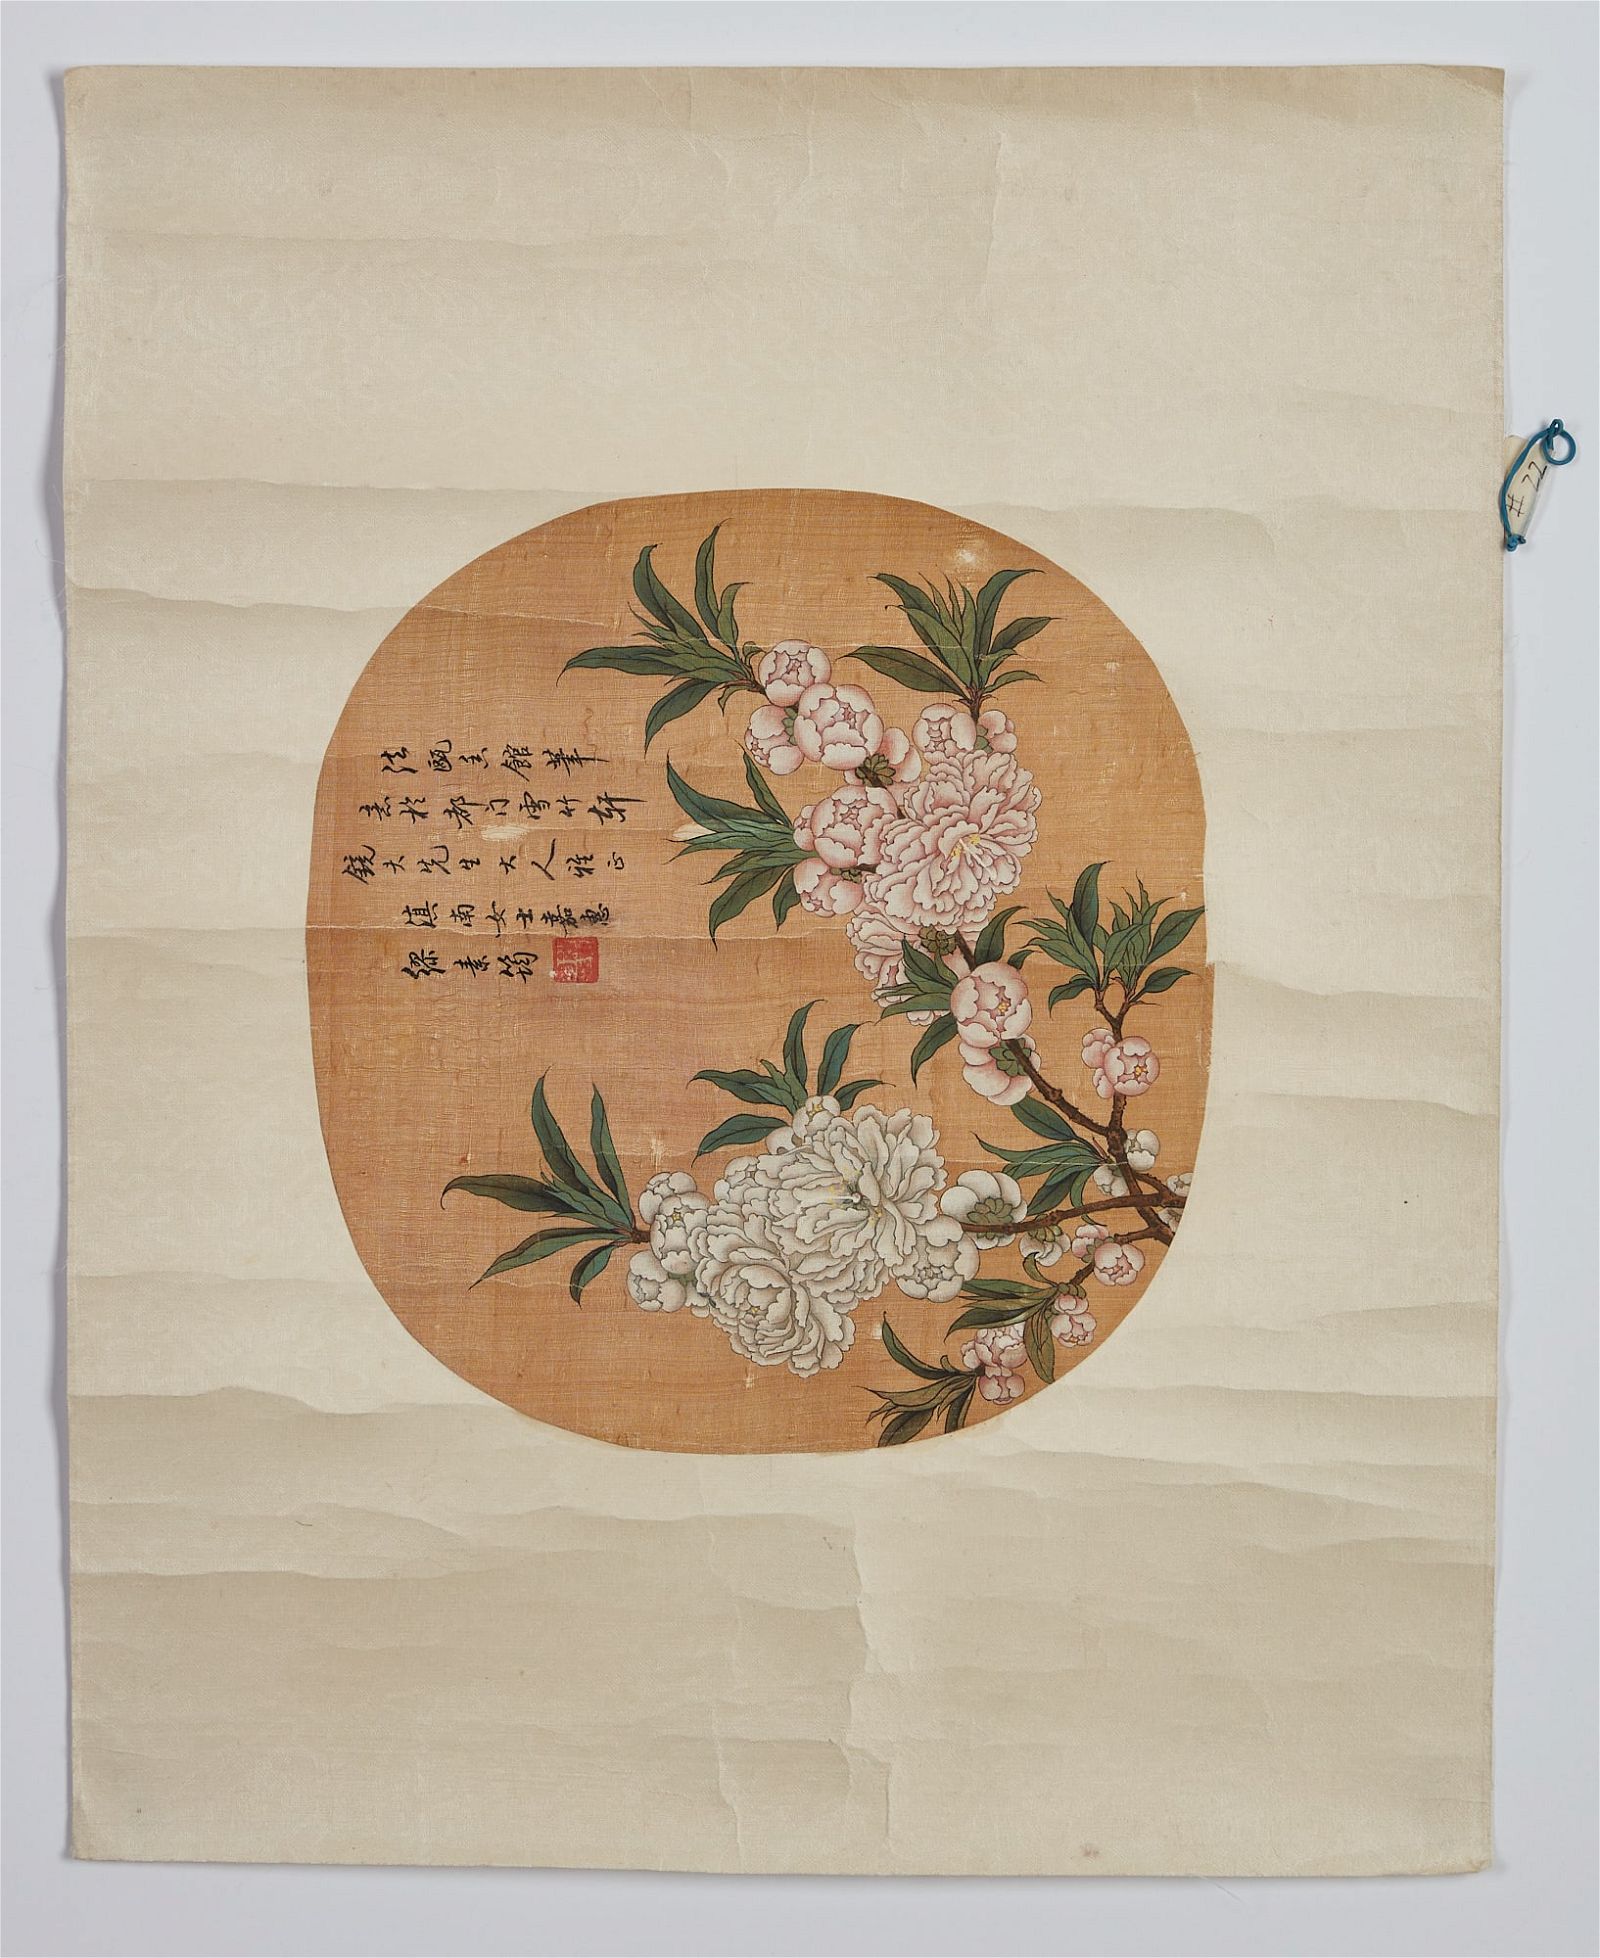 A CHINESE FLOWER FAN PAINTING ON